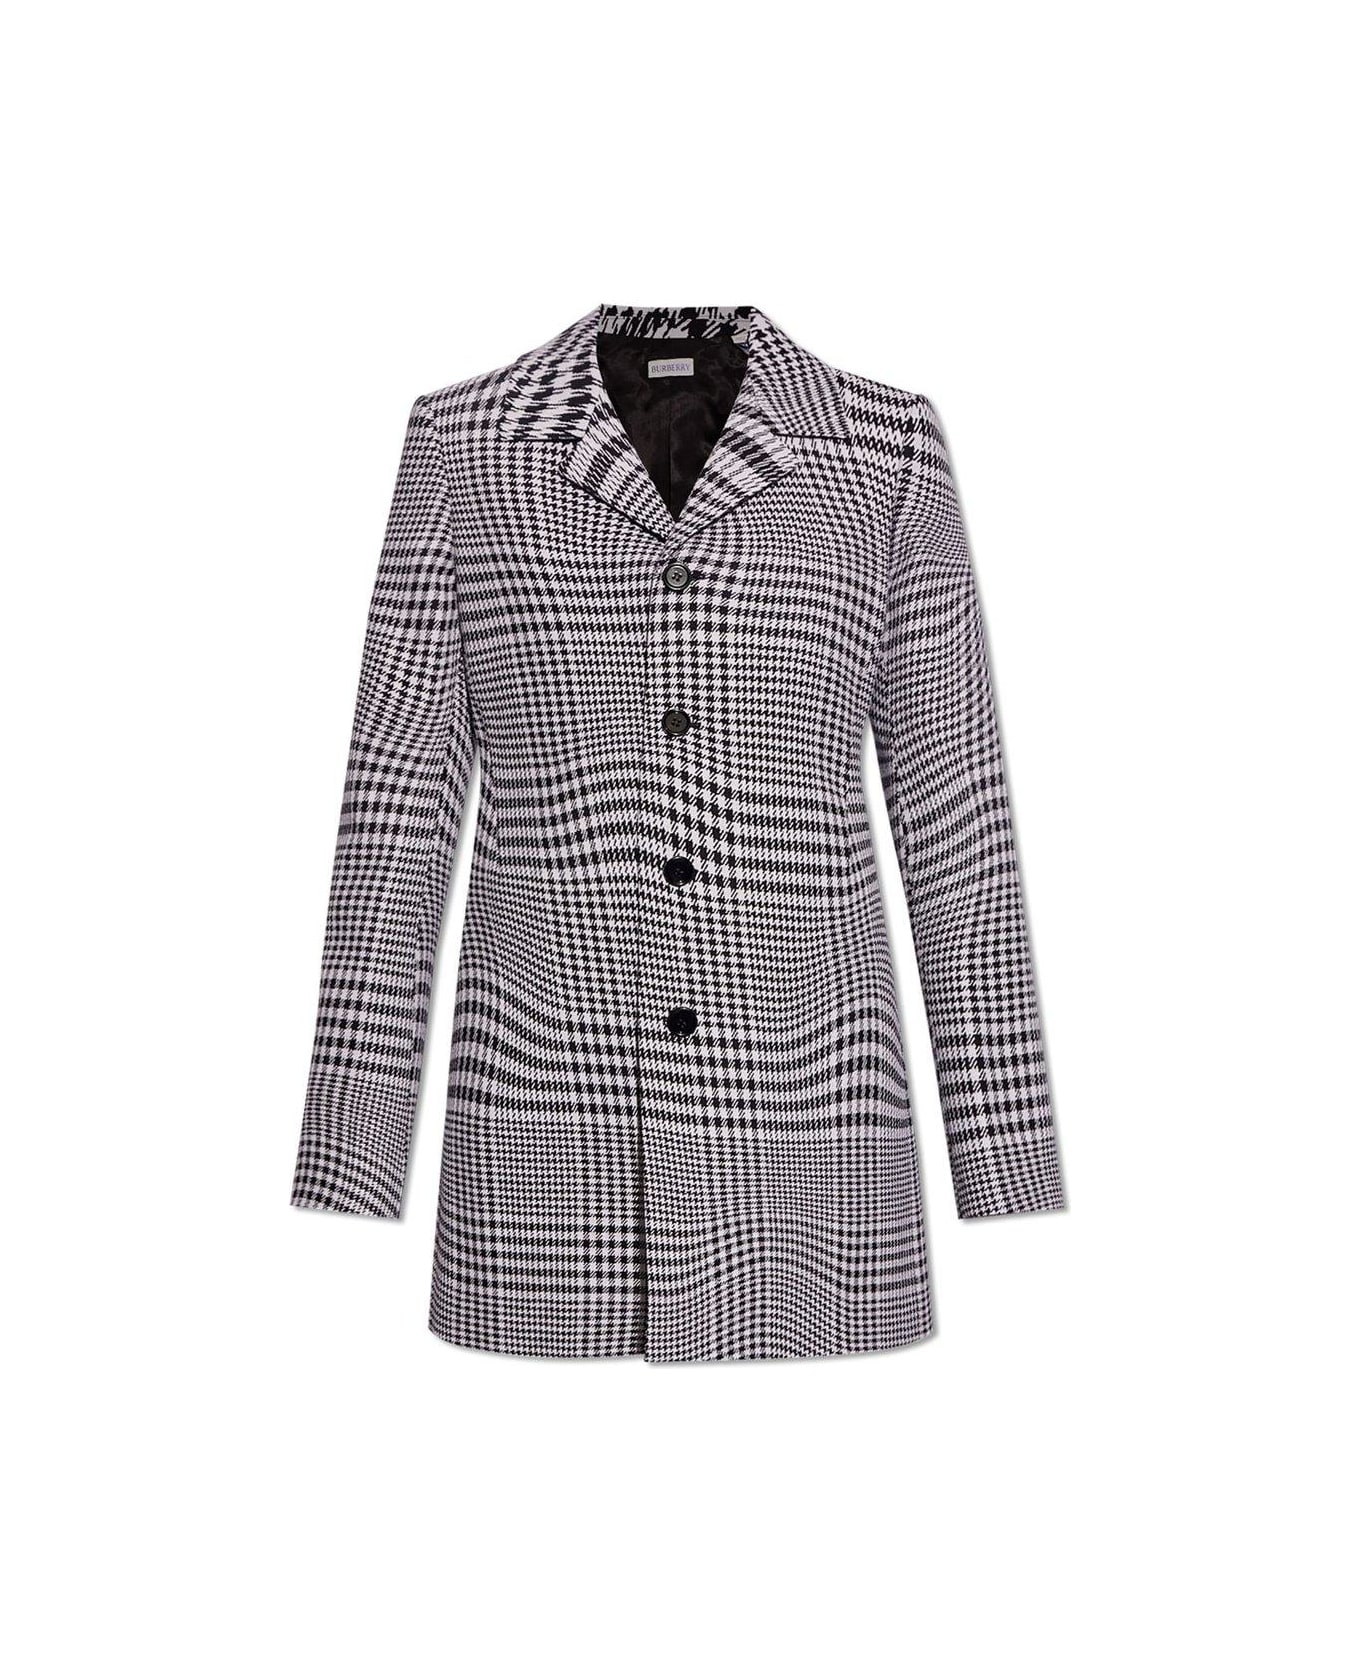 Burberry Warped Houndstooth Single Breasted Blazer - Black ブレザー